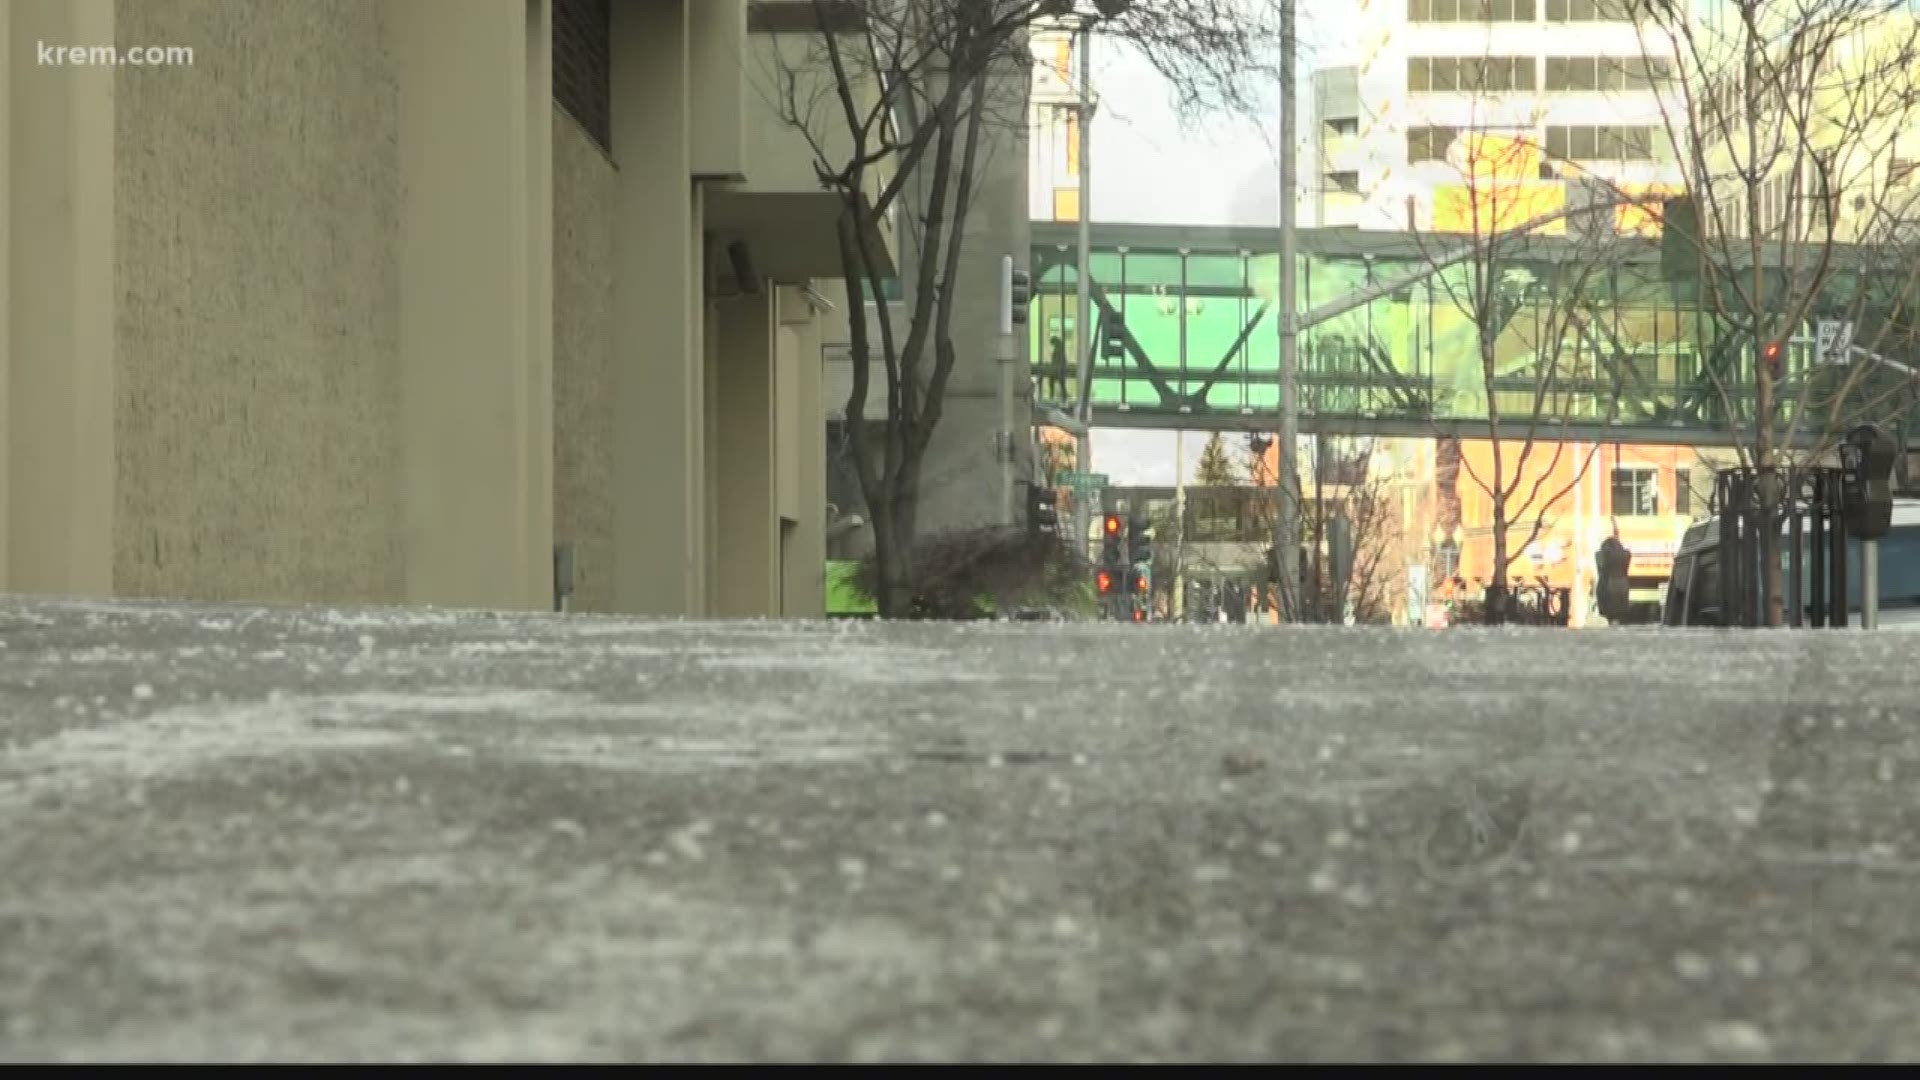 Representatives from the City of Spokane and the Avista utility company say they are not responsible for regulating or maintaining heated sidewalks. This comes after a Spokane man’s dog was killed after being electrocuted in downtown Spokane due to an apparent heated sidewalk malfunction.